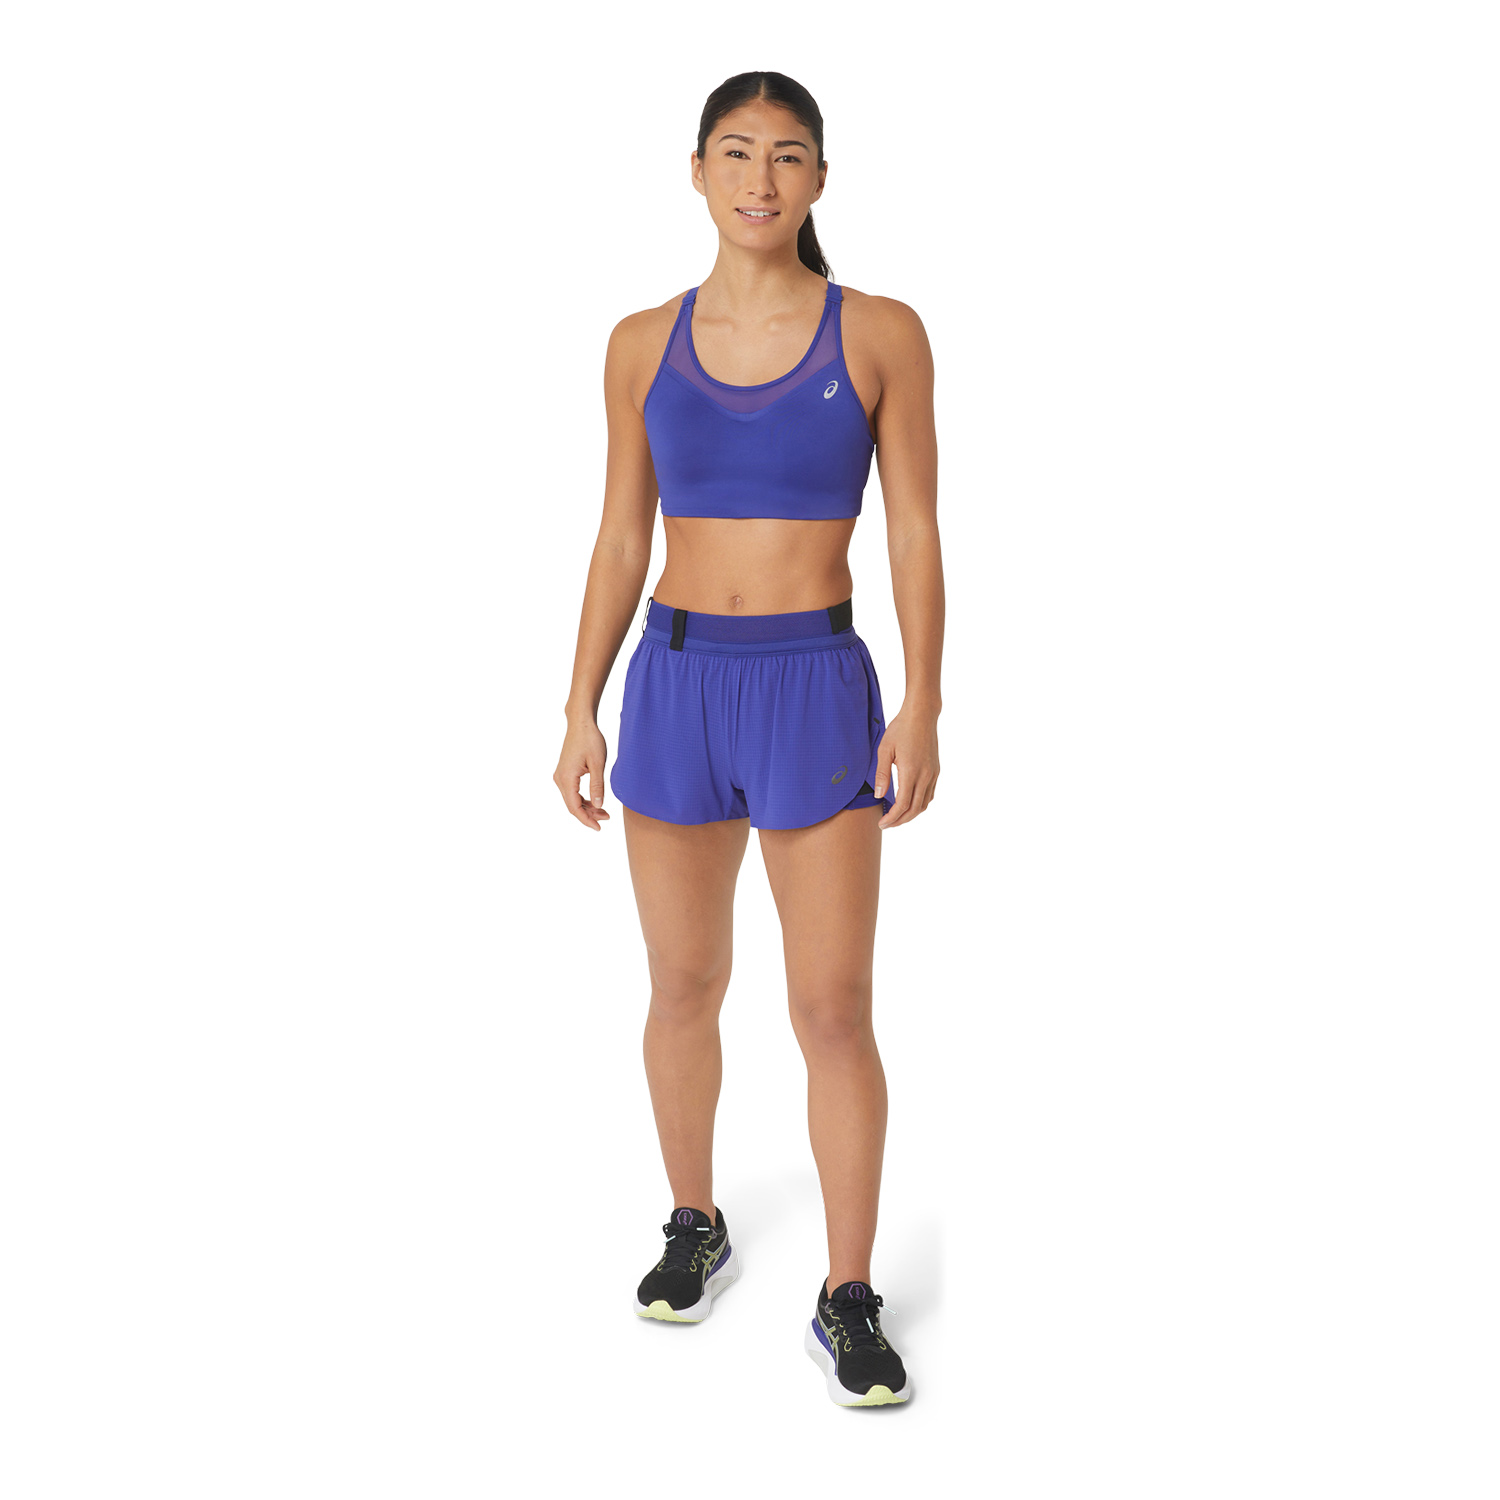 Asics Sports Bra Cup B-C 7568ZN Women's Apparel for Training from Gaponez  Sport Gear